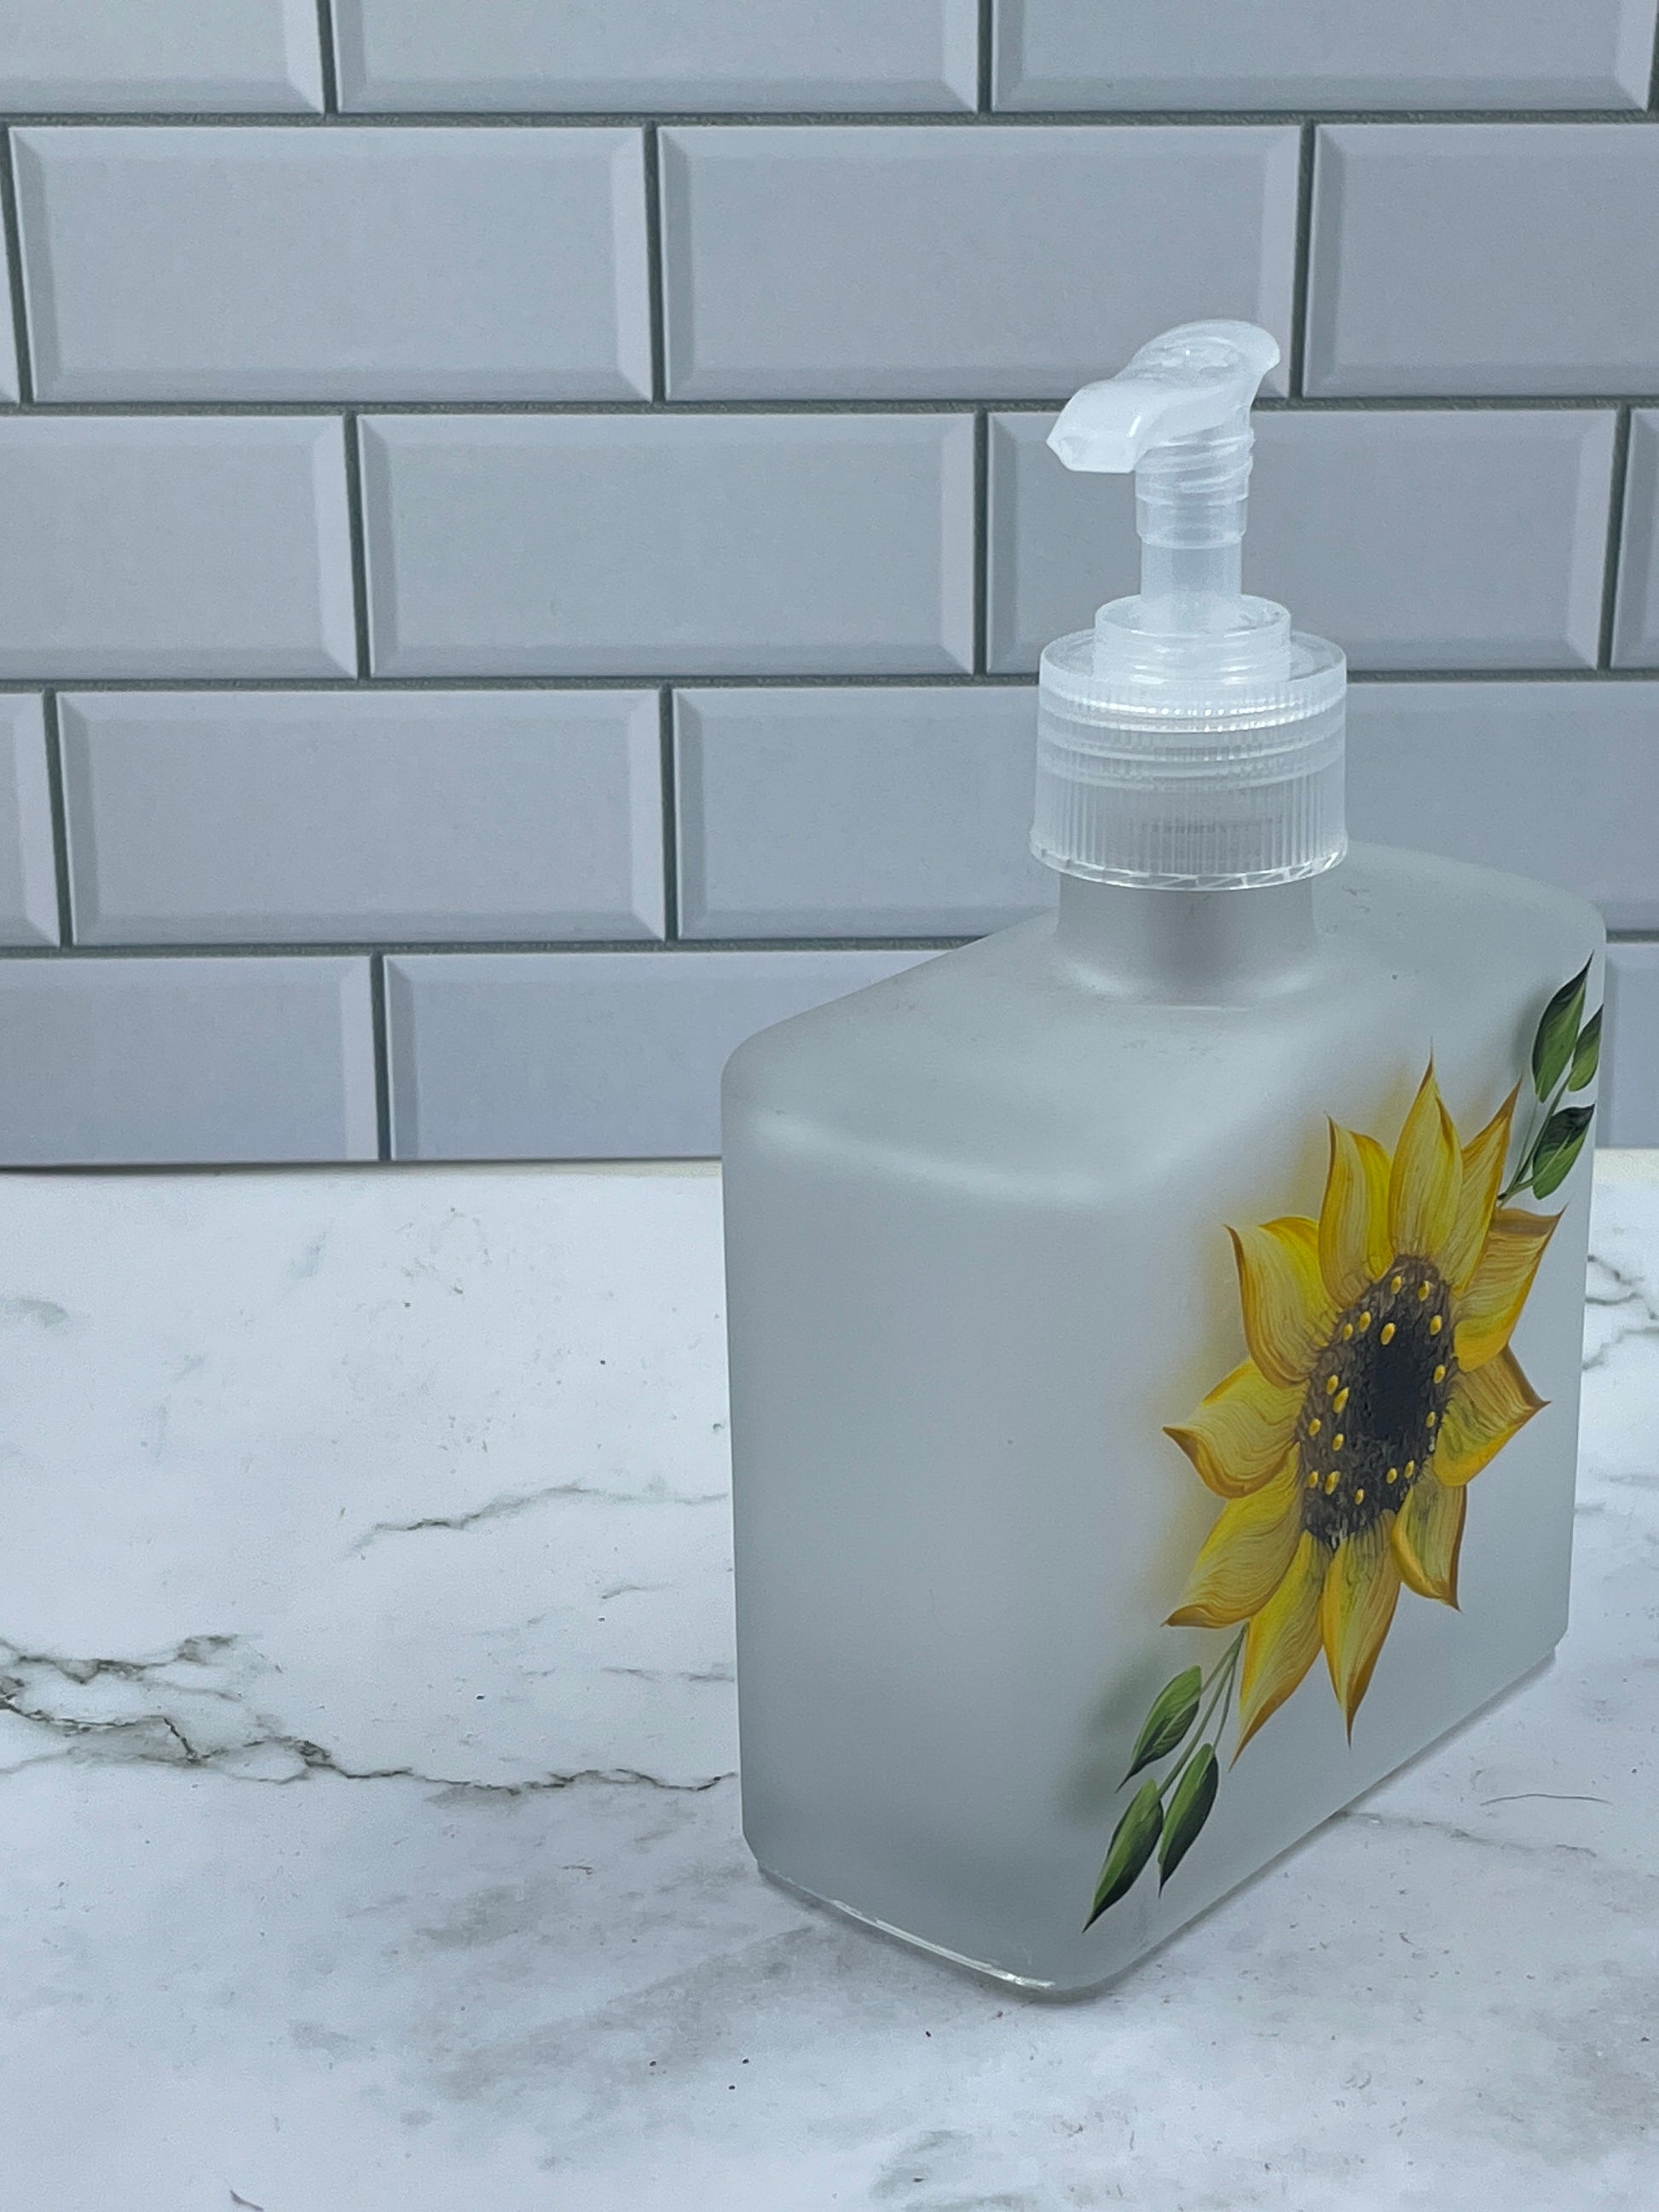 Single sunflower in frosted soap dispenser 8 0z plastic or stainless steel pump new item